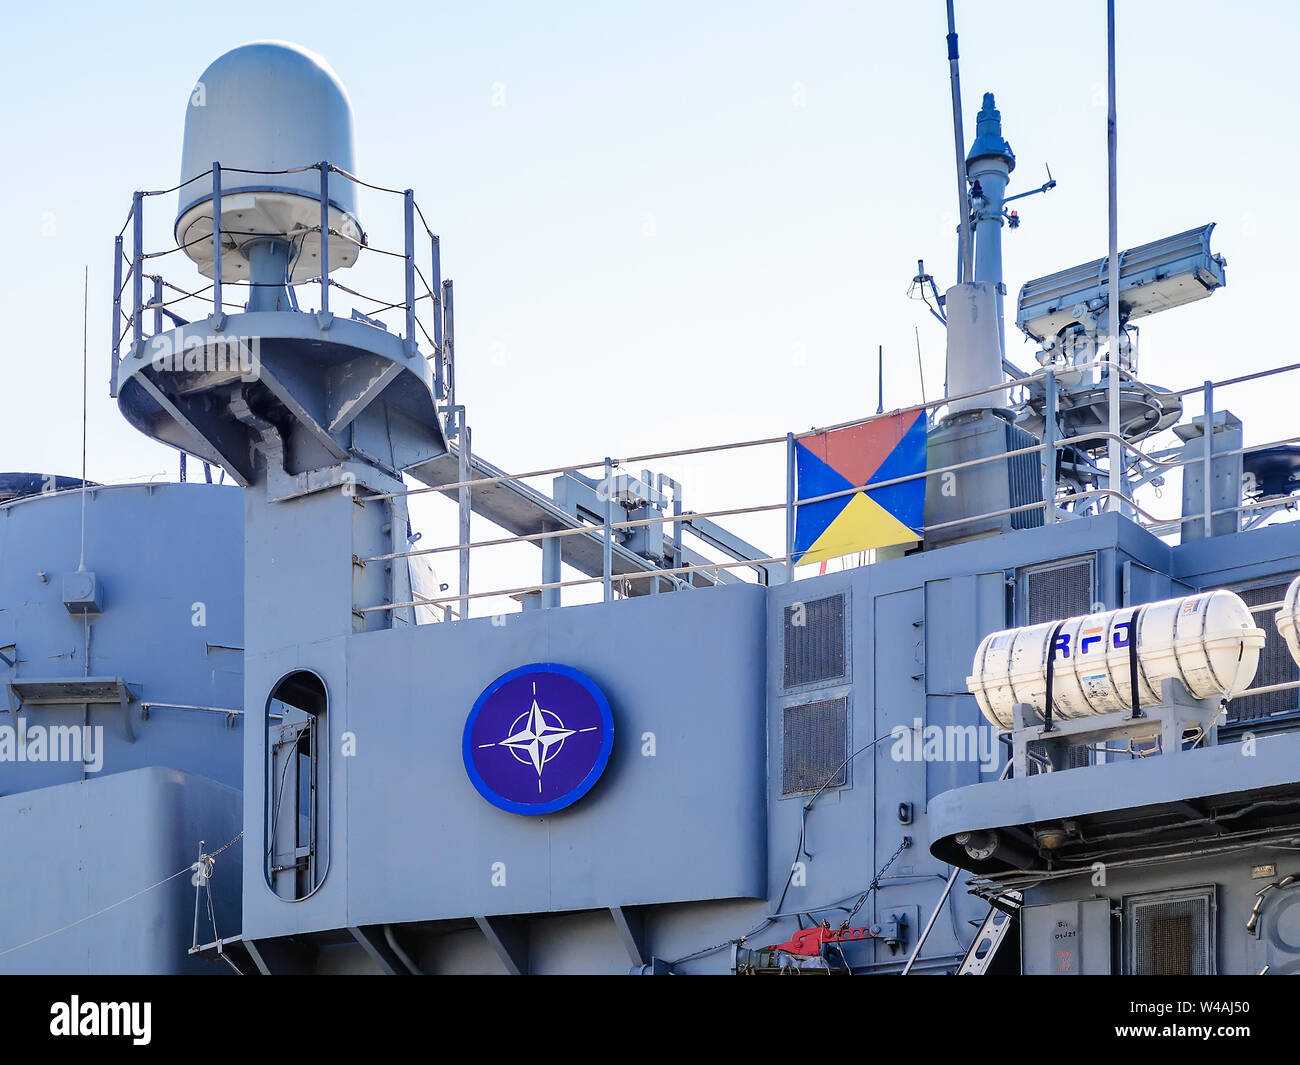 Varna, Bulgaria, July 20, 2019. The blue Nato logo on a side of a large gray modern warship with radars and weapons. Naval exercises. Stock Photo